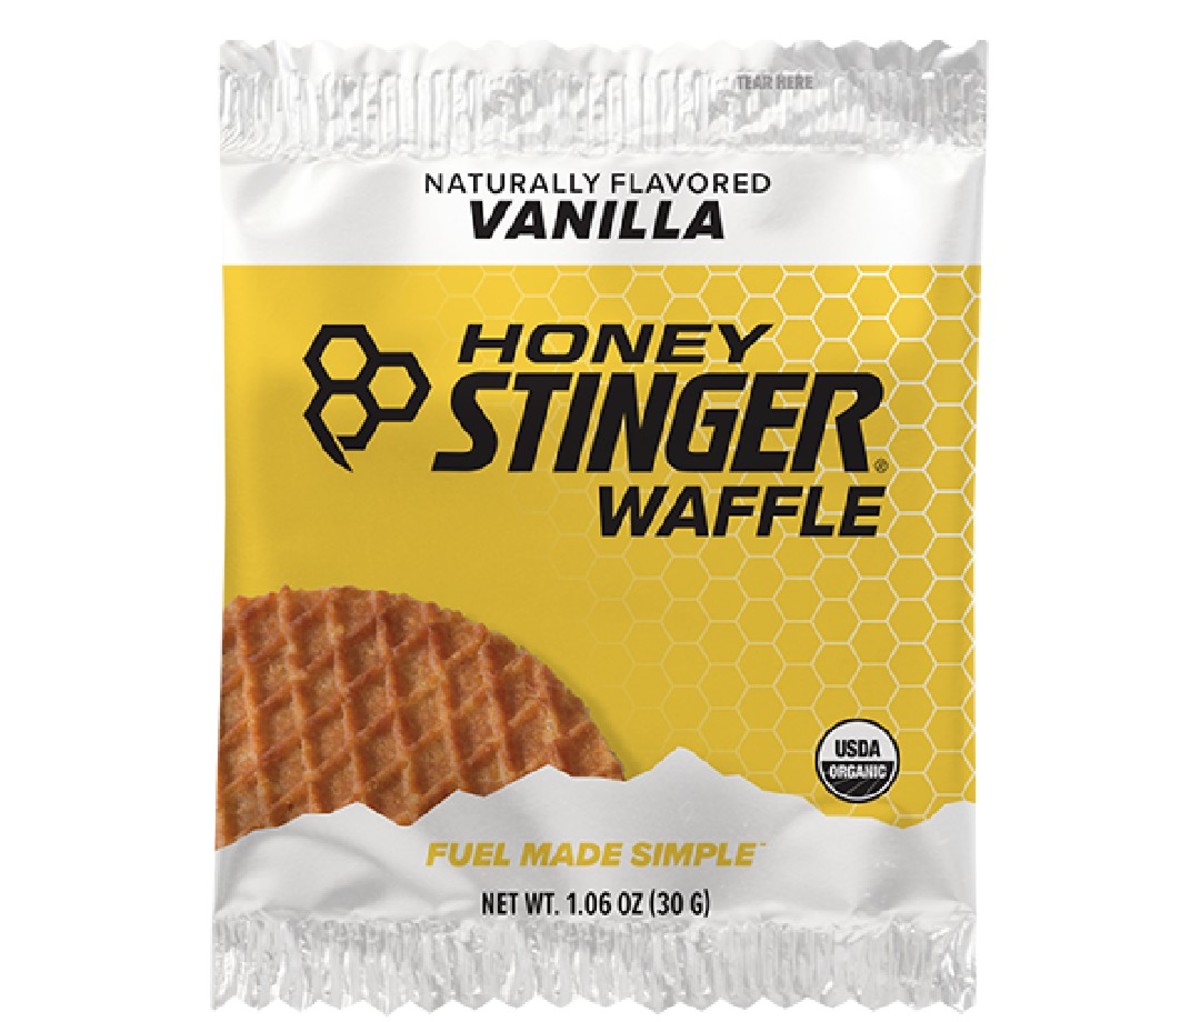 A package containing a Honey Stinger Waffle.